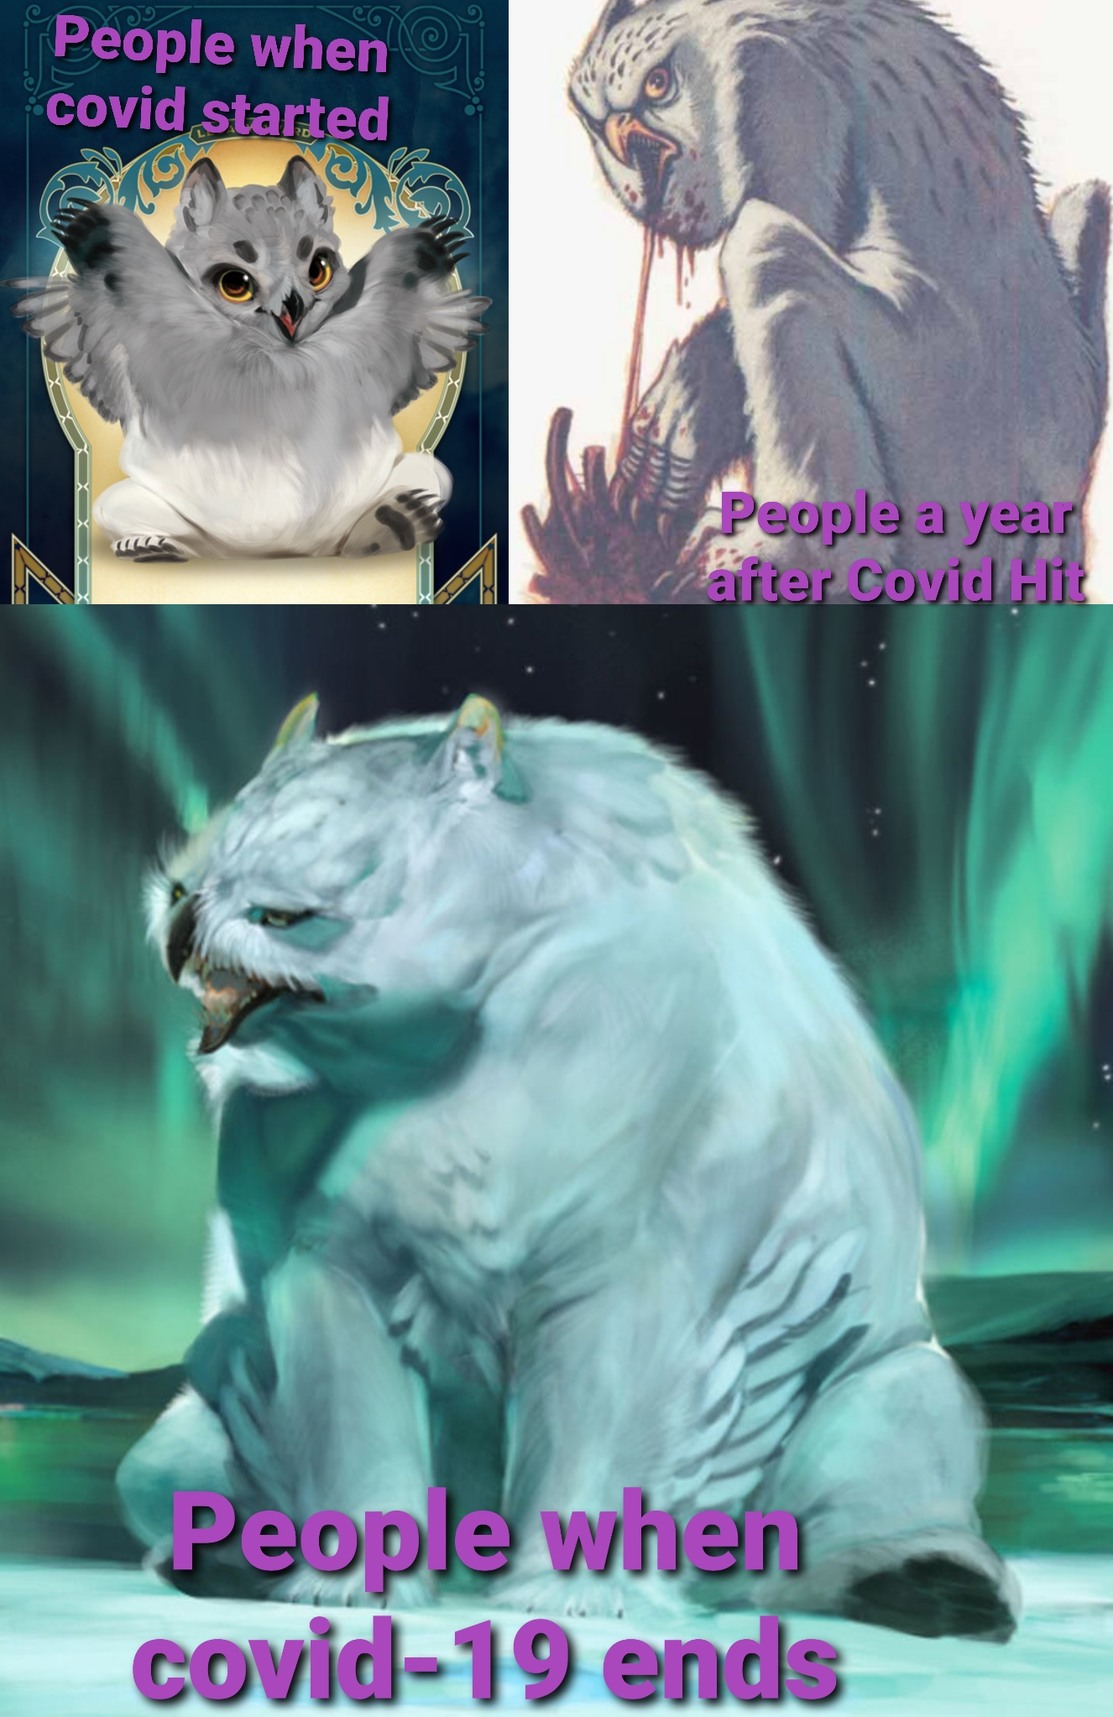 The Stages of people during Covid (As shown with artic owlbears) - meme